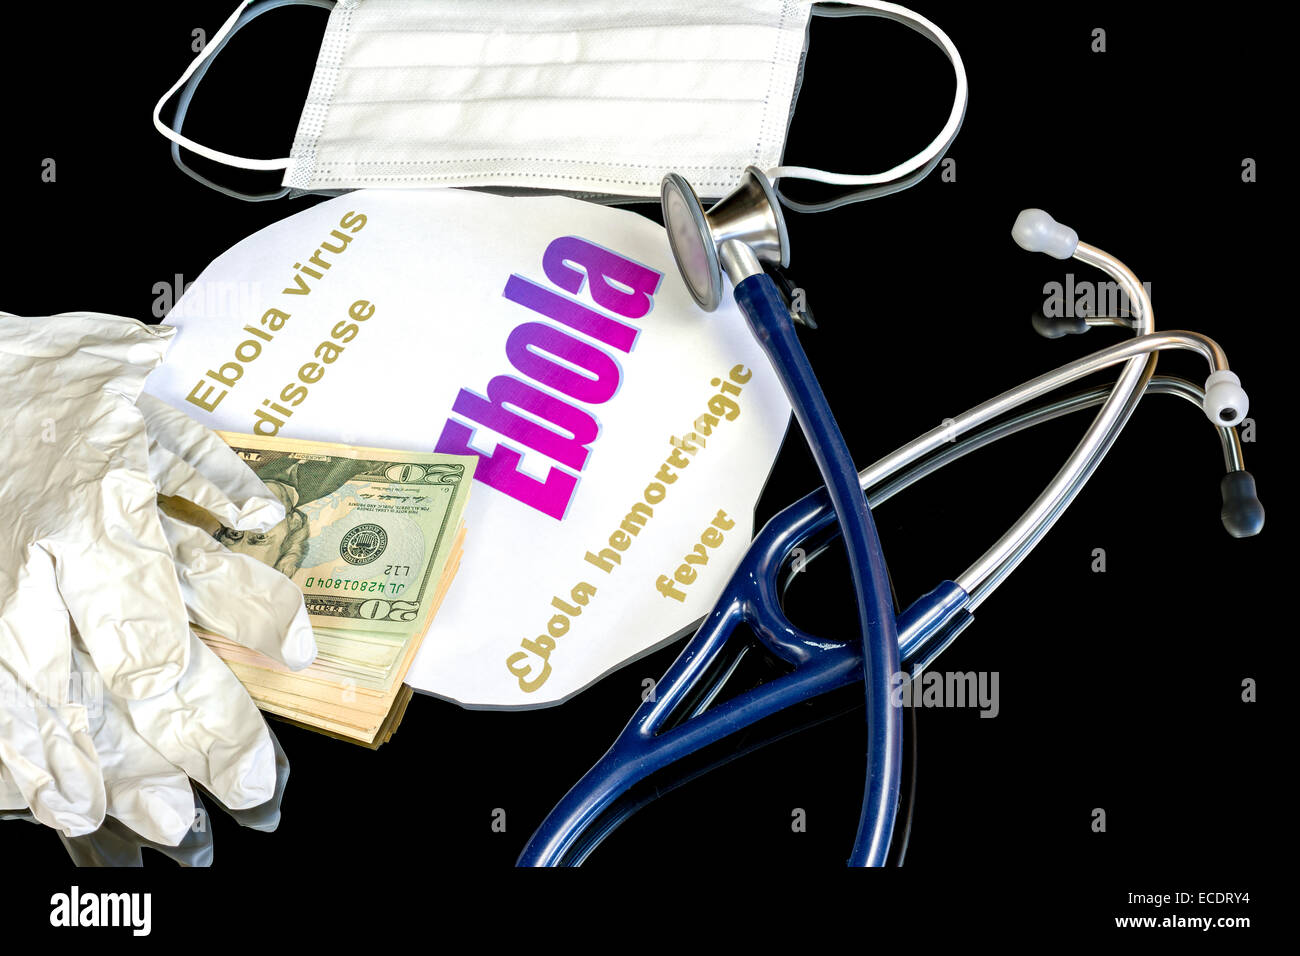 MEdical equipment needed to fight Ebola Stock Photo